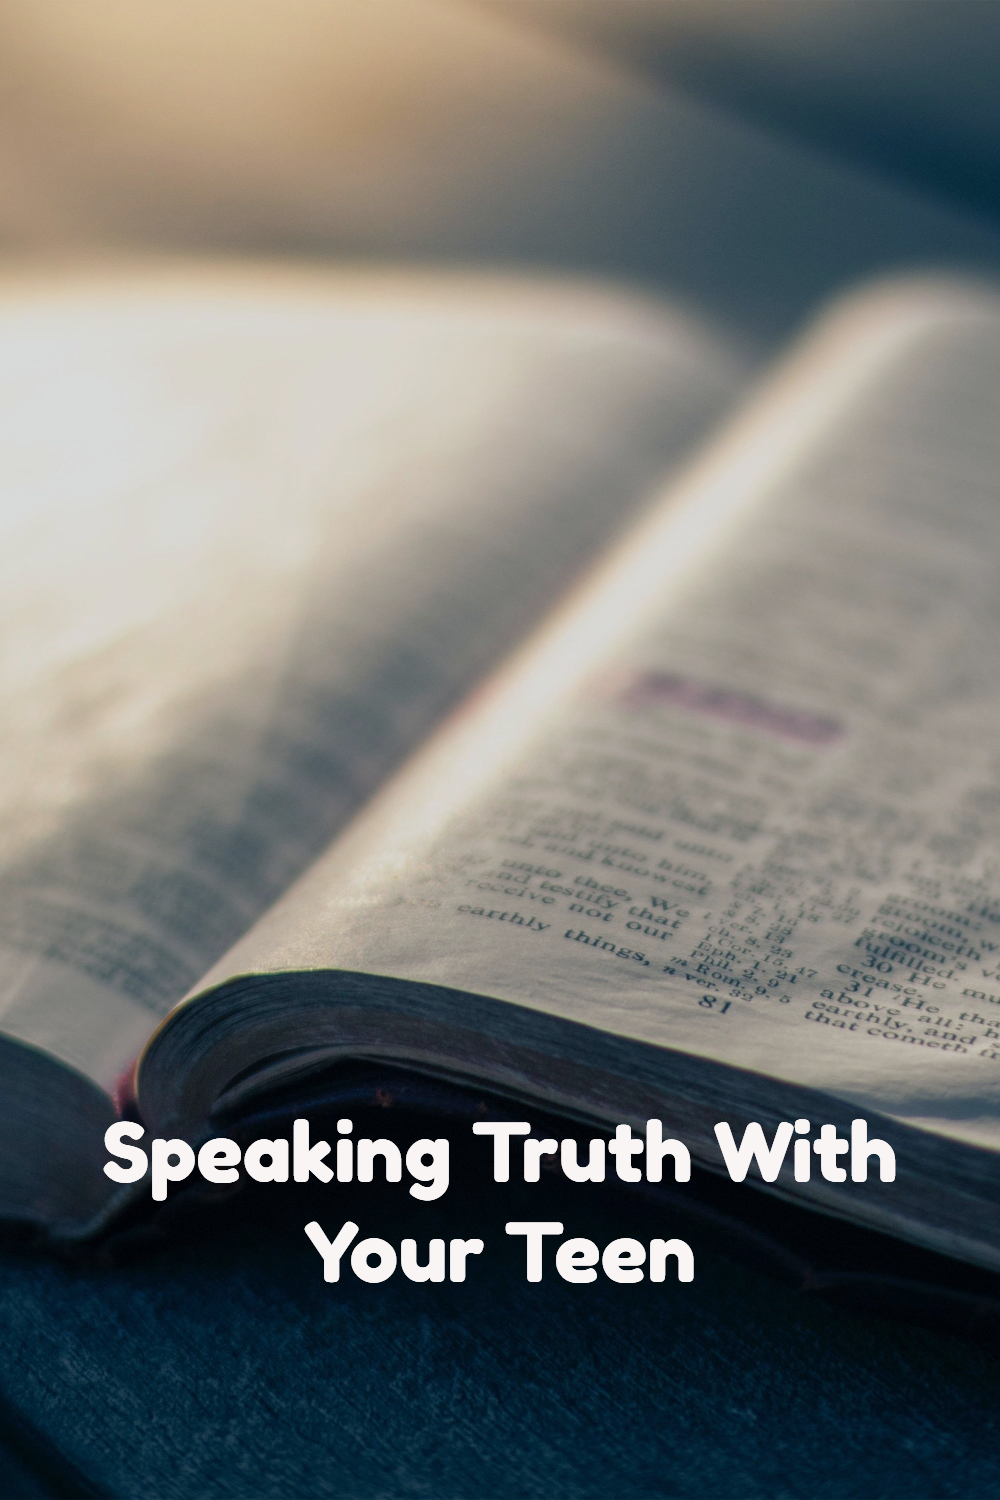 Five Books For Speaking Truth With Your Teen